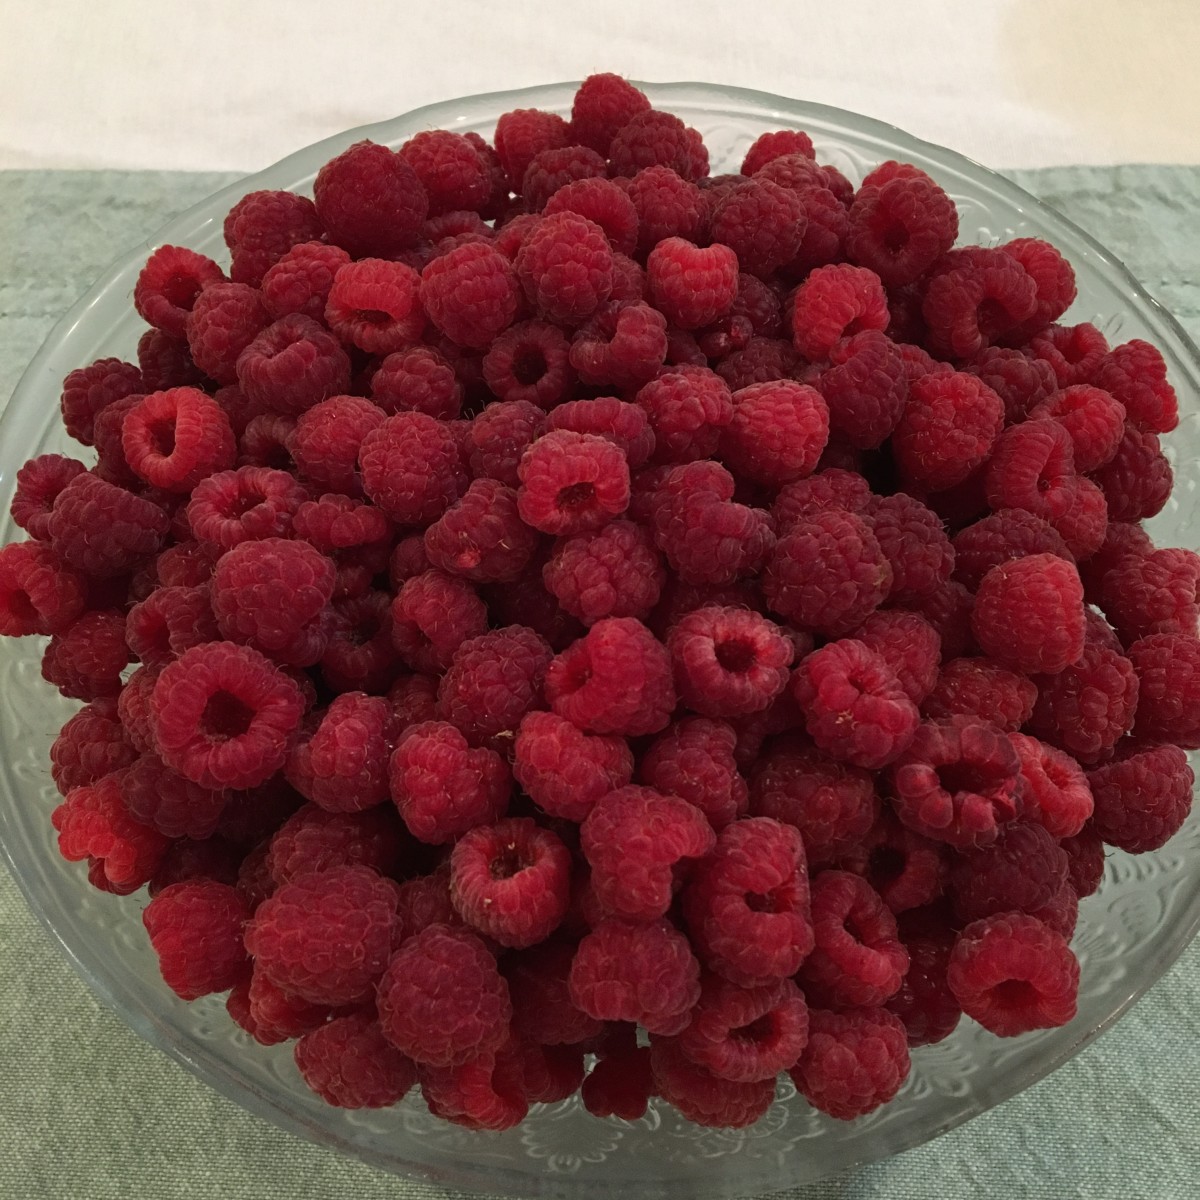 Raspberries washed and ready to eat or freeze.